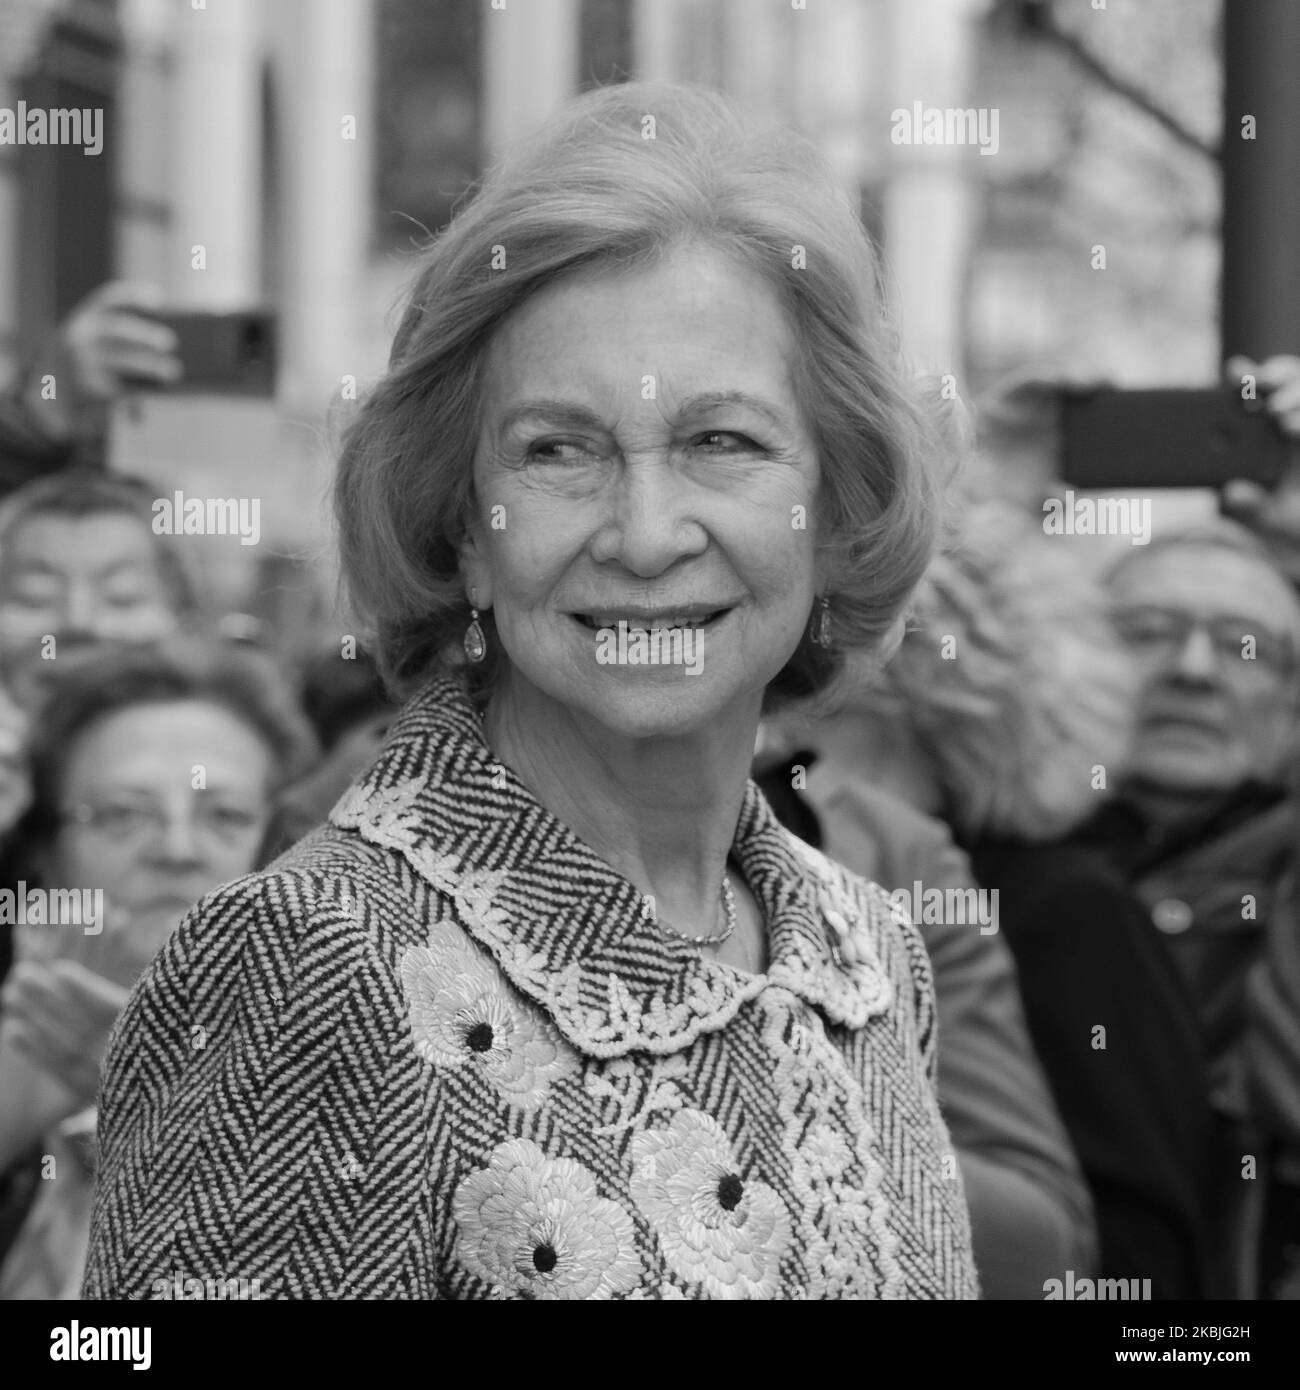 (EDITOR'S NOTE: Image was converted to black and white) Queen Sofia of spain attends the traditional thanksgiving to Medinaceli on March 06, 2020 in Madrid, Spain. On the first Friday of March there is a tradition to kiss the feet of Cristo de Medinaceli sculpture to show devotion. Following instructions from the Cartagena Bishop, the congregation are not to kiss or touch the sculpture and exchanged the gesture by bowing their heads. (Photo by Oscar Gonzalez/NurPhoto) Stock Photo